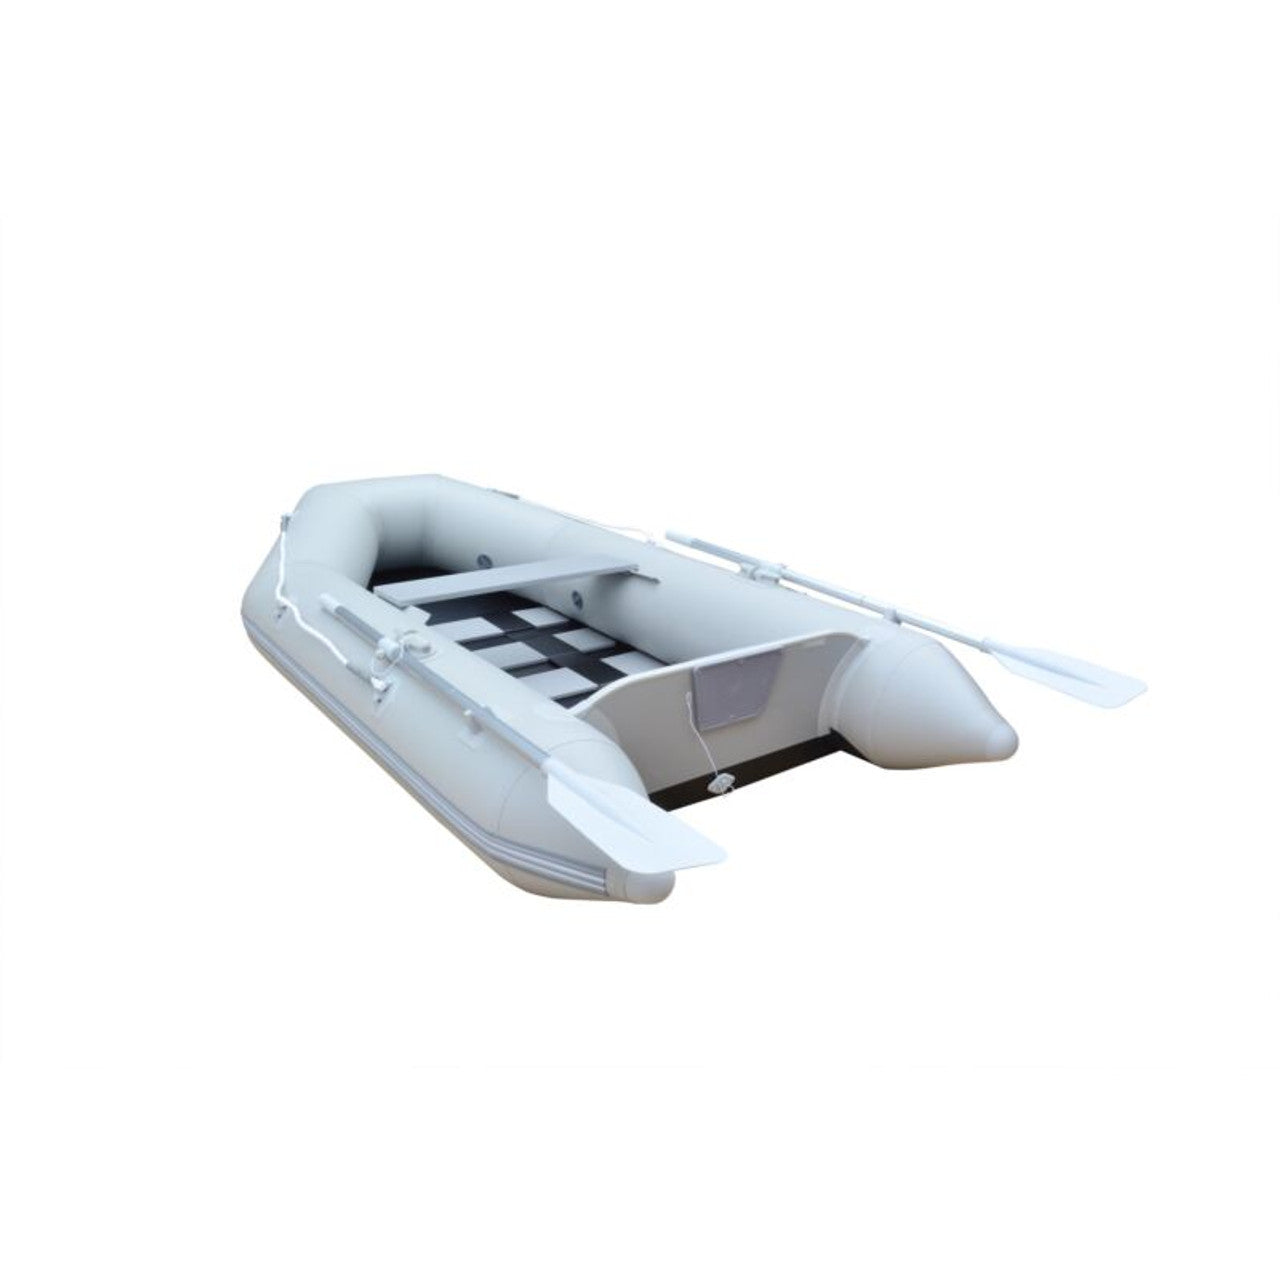 Waveco 2.6m Inflatable Dinghy with Slatted Floor